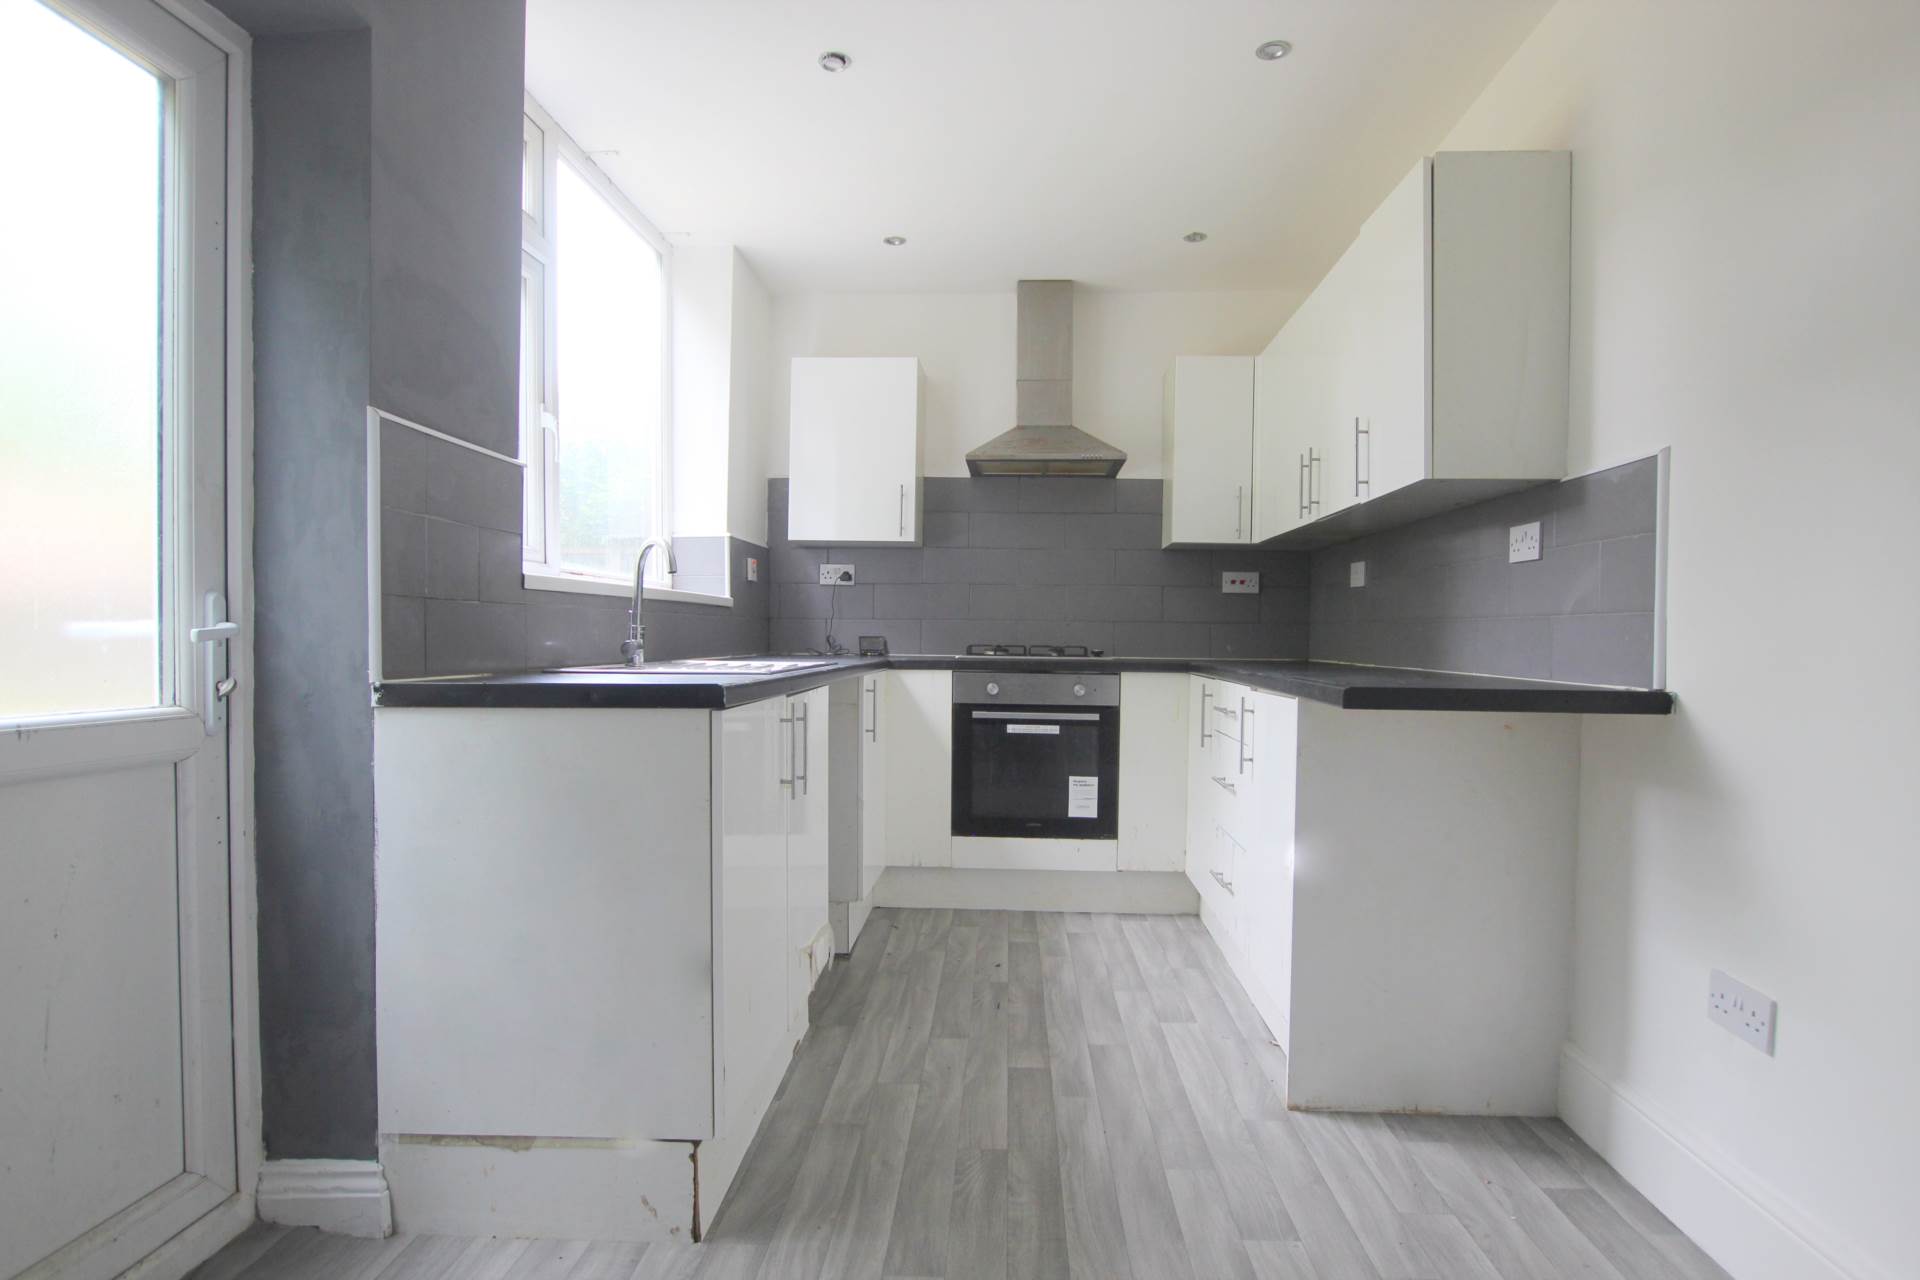 3 bed End Terraced House for rent in Manchester. From Sure Move Lettings